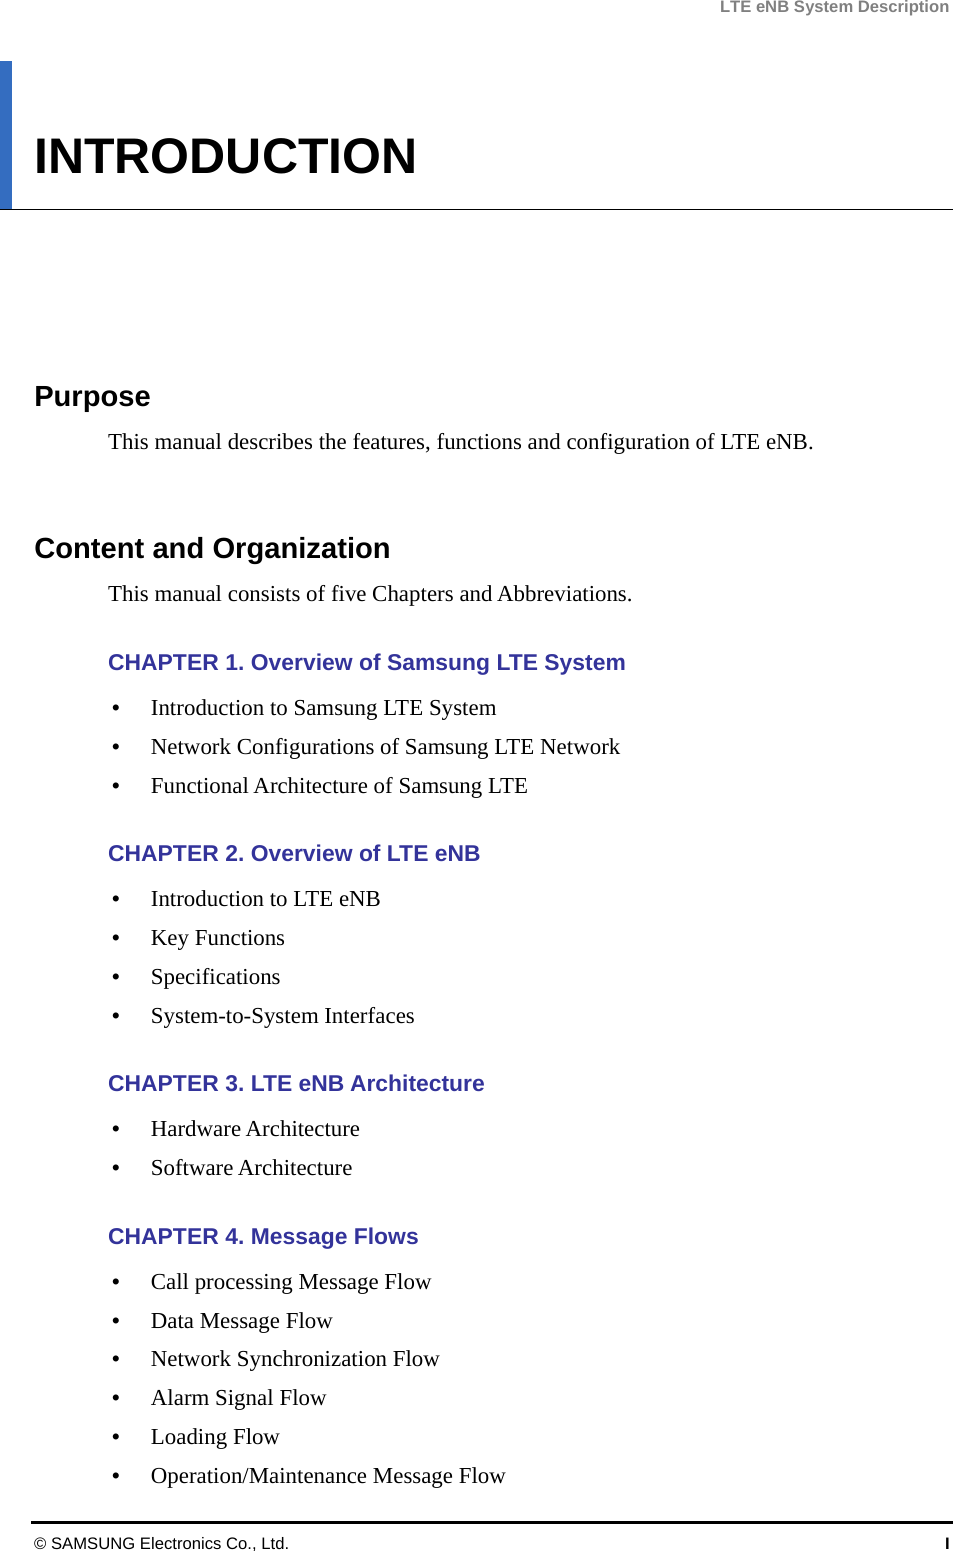 LTE eNB System Description INTRODUCTION      Purpose This manual describes the features, functions and configuration of LTE eNB.   Content and Organization This manual consists of five Chapters and Abbreviations.  CHAPTER 1. Overview of Samsung LTE System  Introduction to Samsung LTE System  Network Configurations of Samsung LTE Network  Functional Architecture of Samsung LTE  CHAPTER 2. Overview of LTE eNB  Introduction to LTE eNB  Key Functions  Specifications  System-to-System Interfaces  CHAPTER 3. LTE eNB Architecture  Hardware Architecture  Software Architecture  CHAPTER 4. Message Flows  Call processing Message Flow  Data Message Flow  Network Synchronization Flow  Alarm Signal Flow  Loading Flow  Operation/Maintenance Message Flow © SAMSUNG Electronics Co., Ltd.  I 